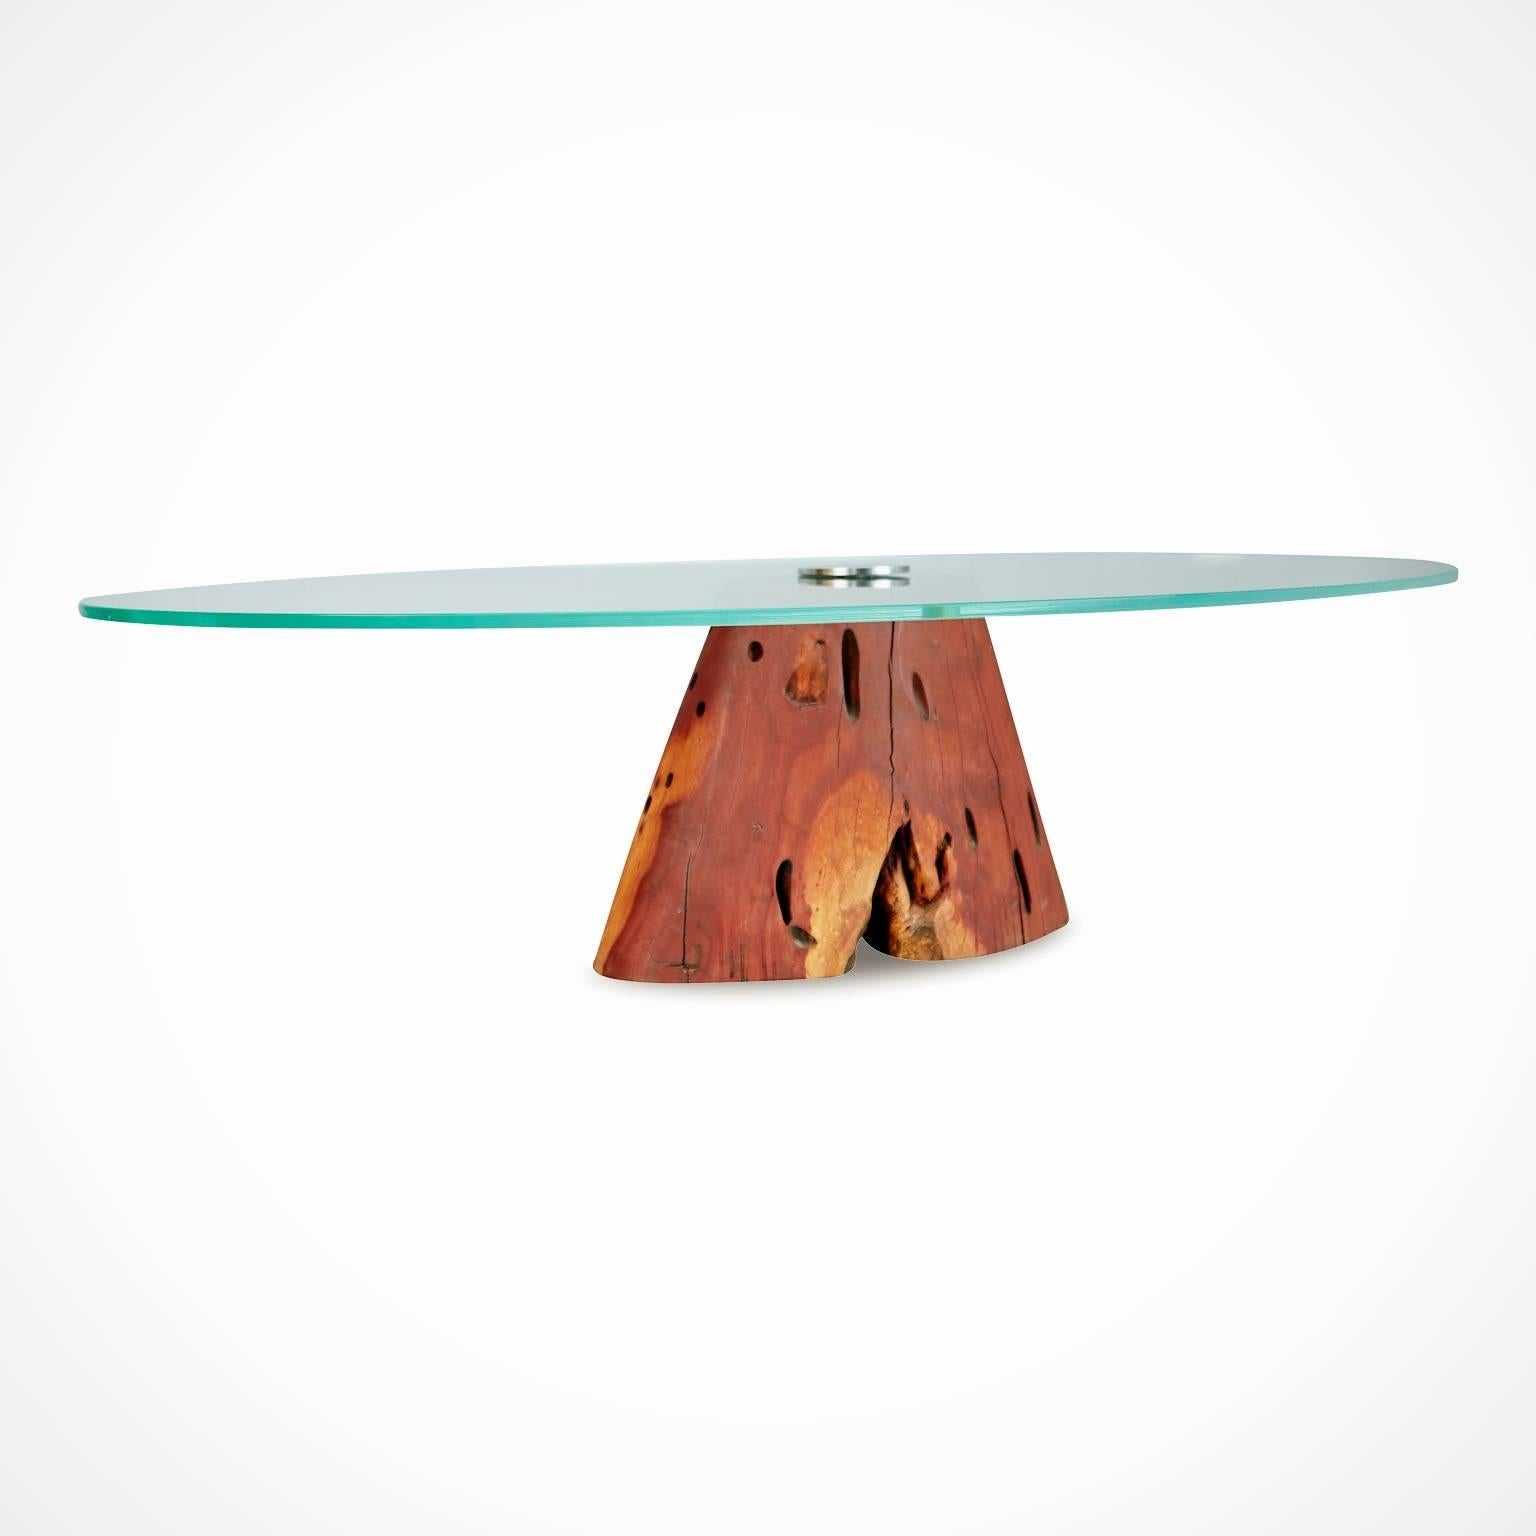 Brazilian Custom Salvaged Jatoba Wood and Glass Coffee Table by Tunico T, Brazil, Signed For Sale